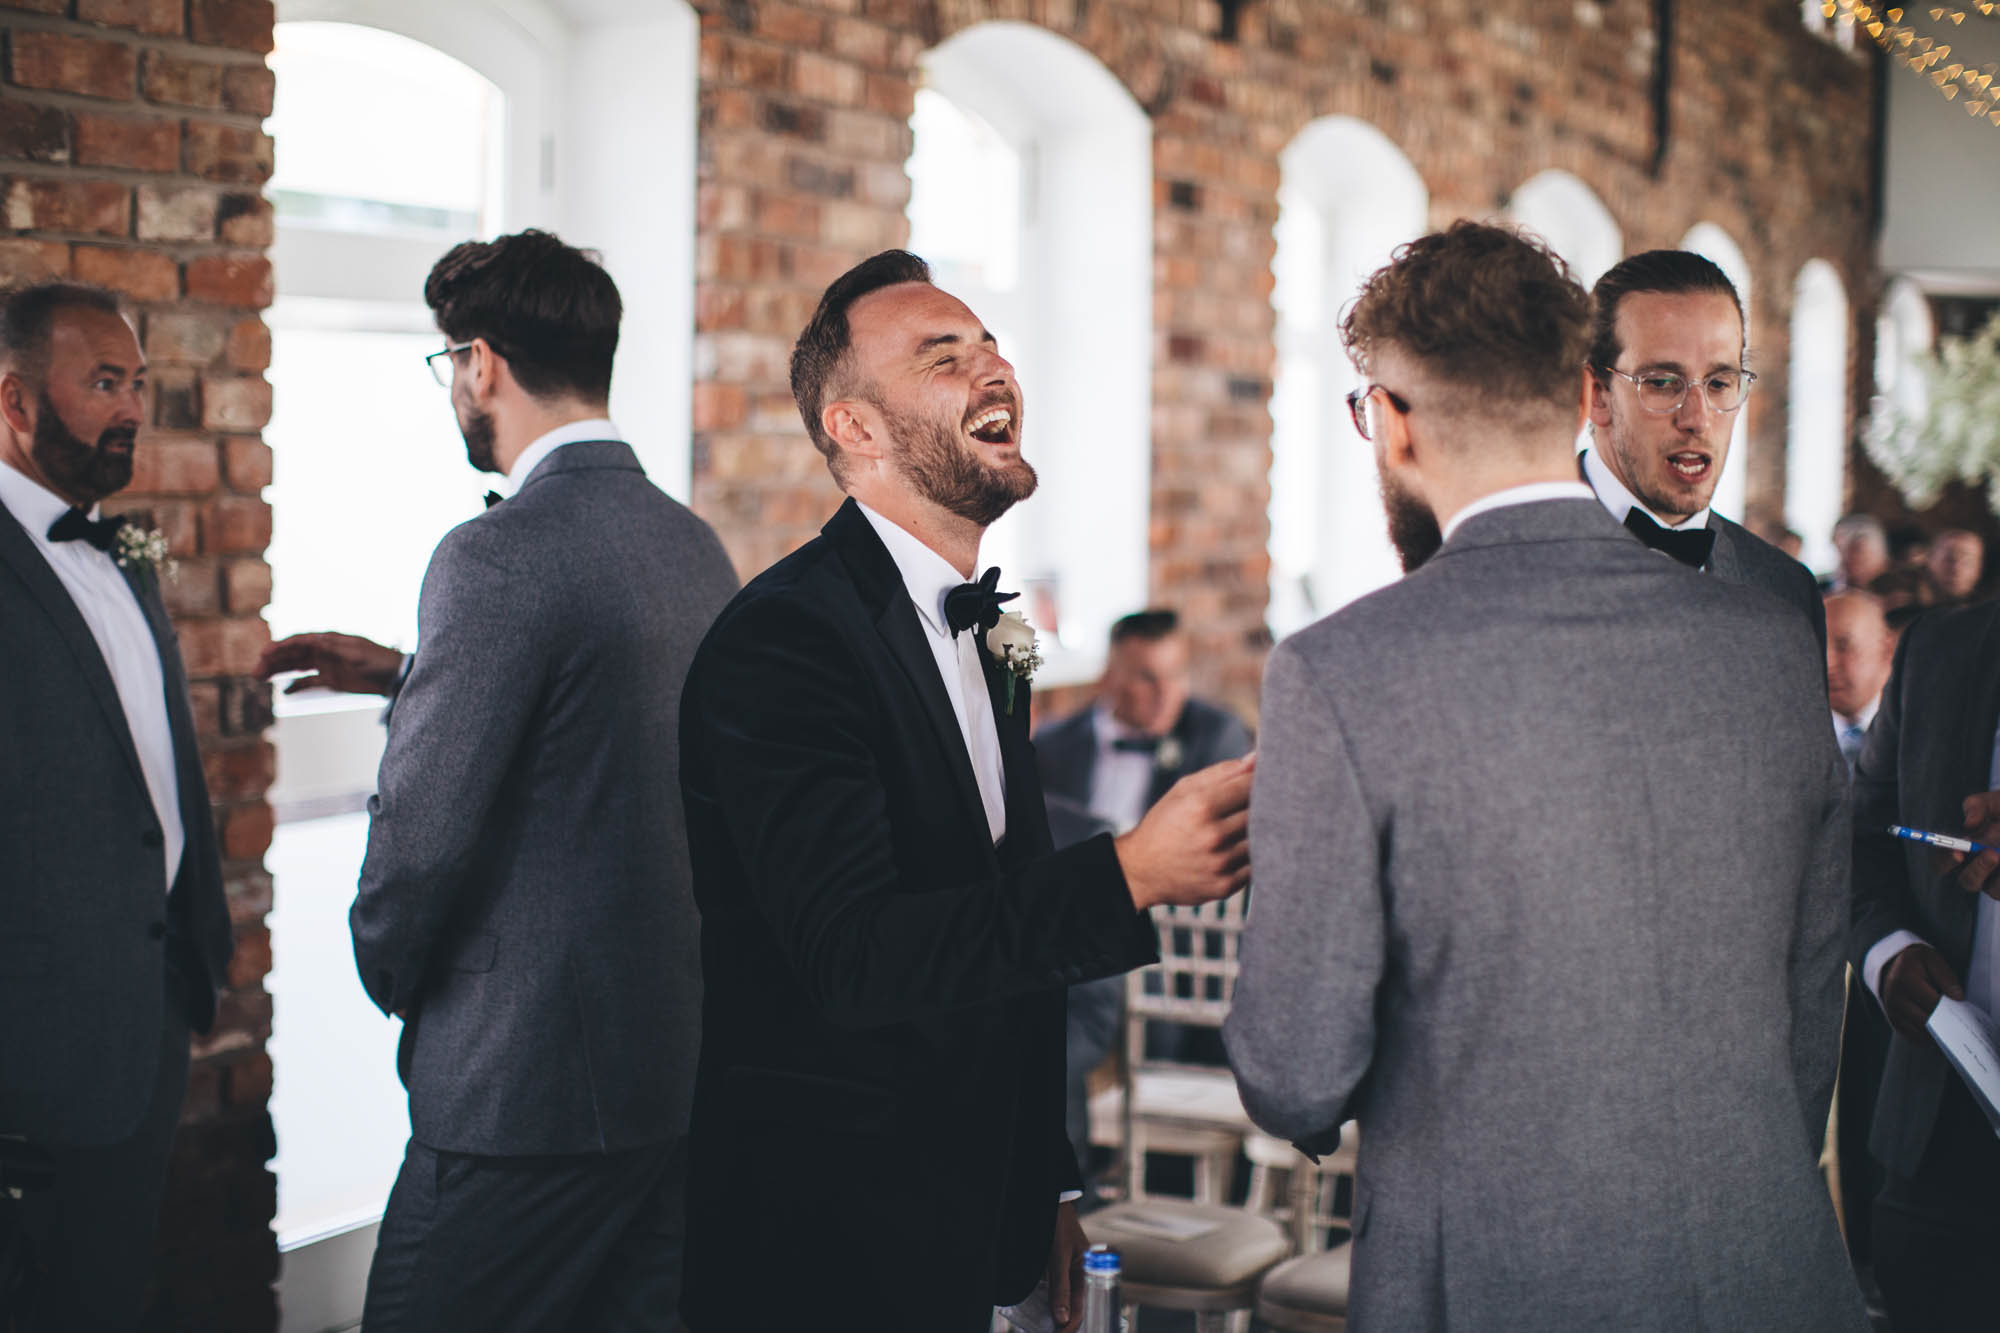 Groom laughing before wedding ceremony with Best Man and ushers